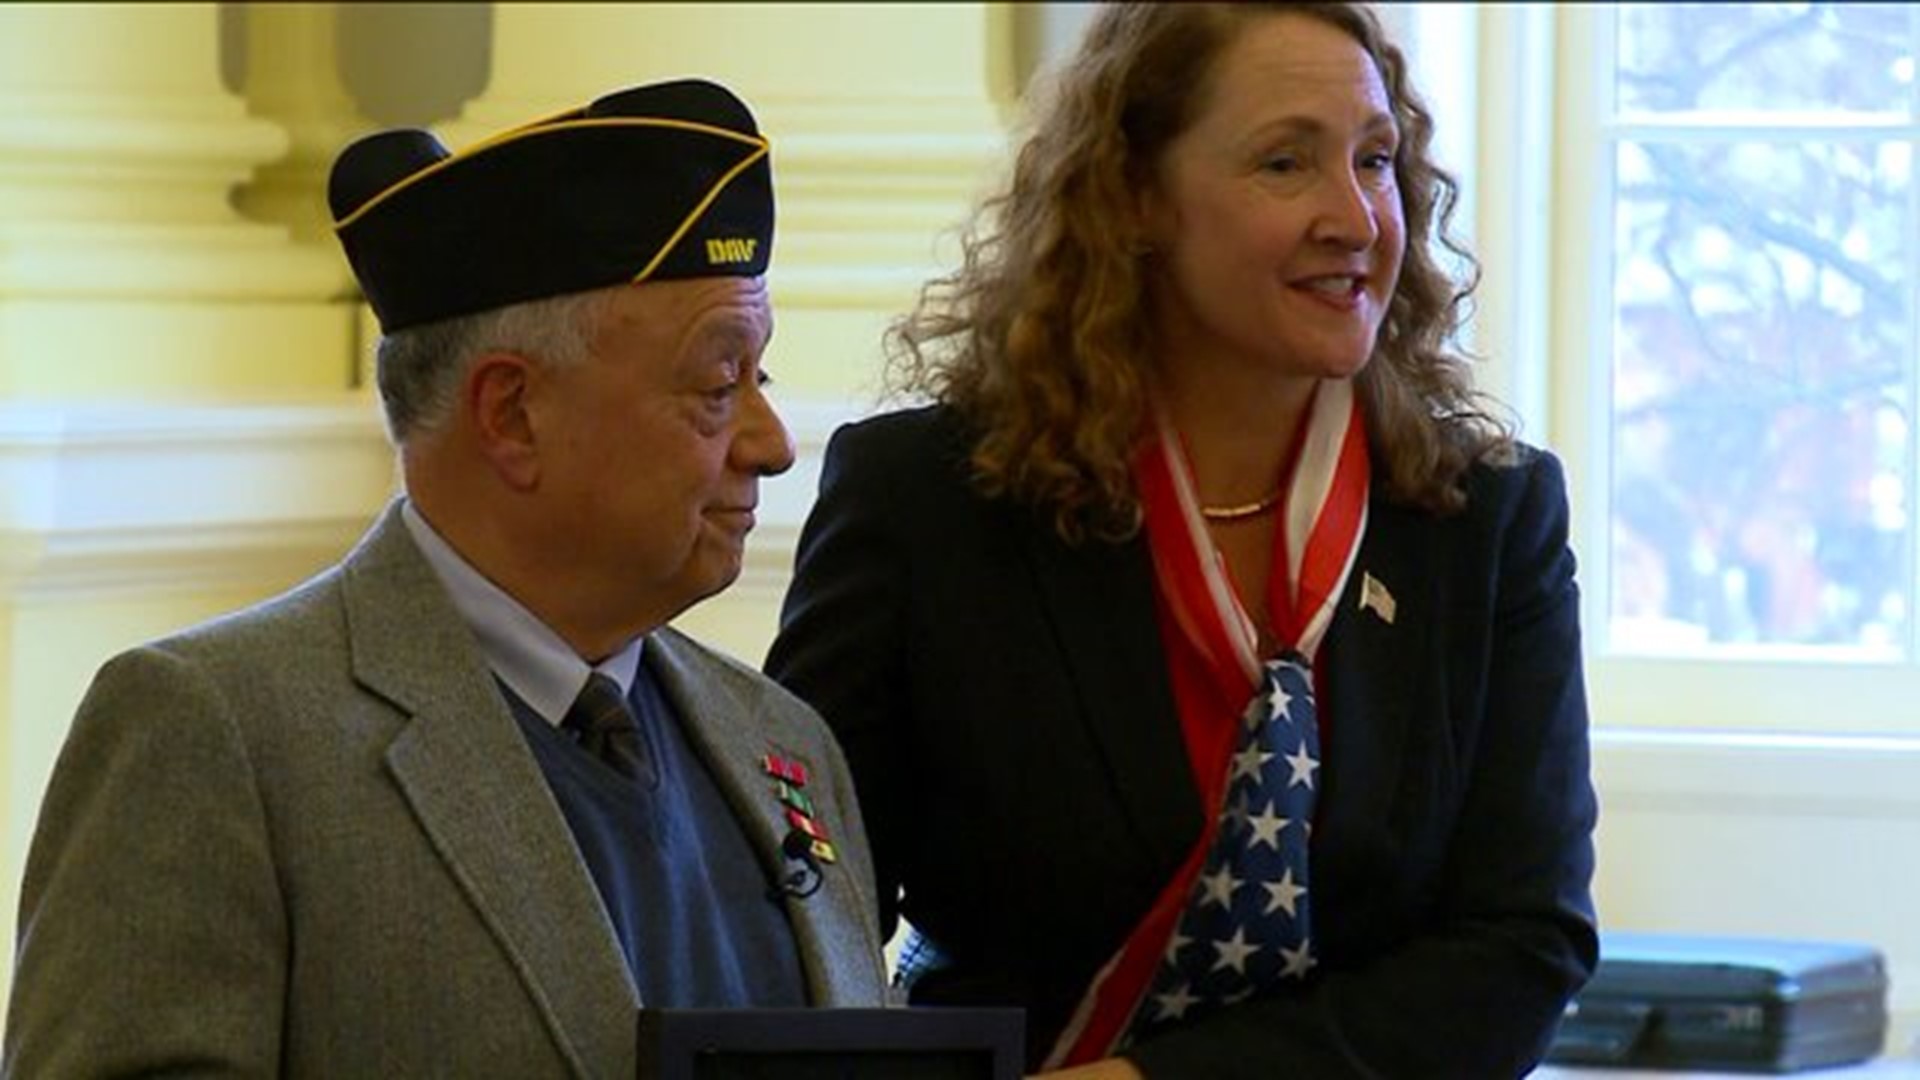 Waterbury Veteran is Awarded Medals Decades After Service